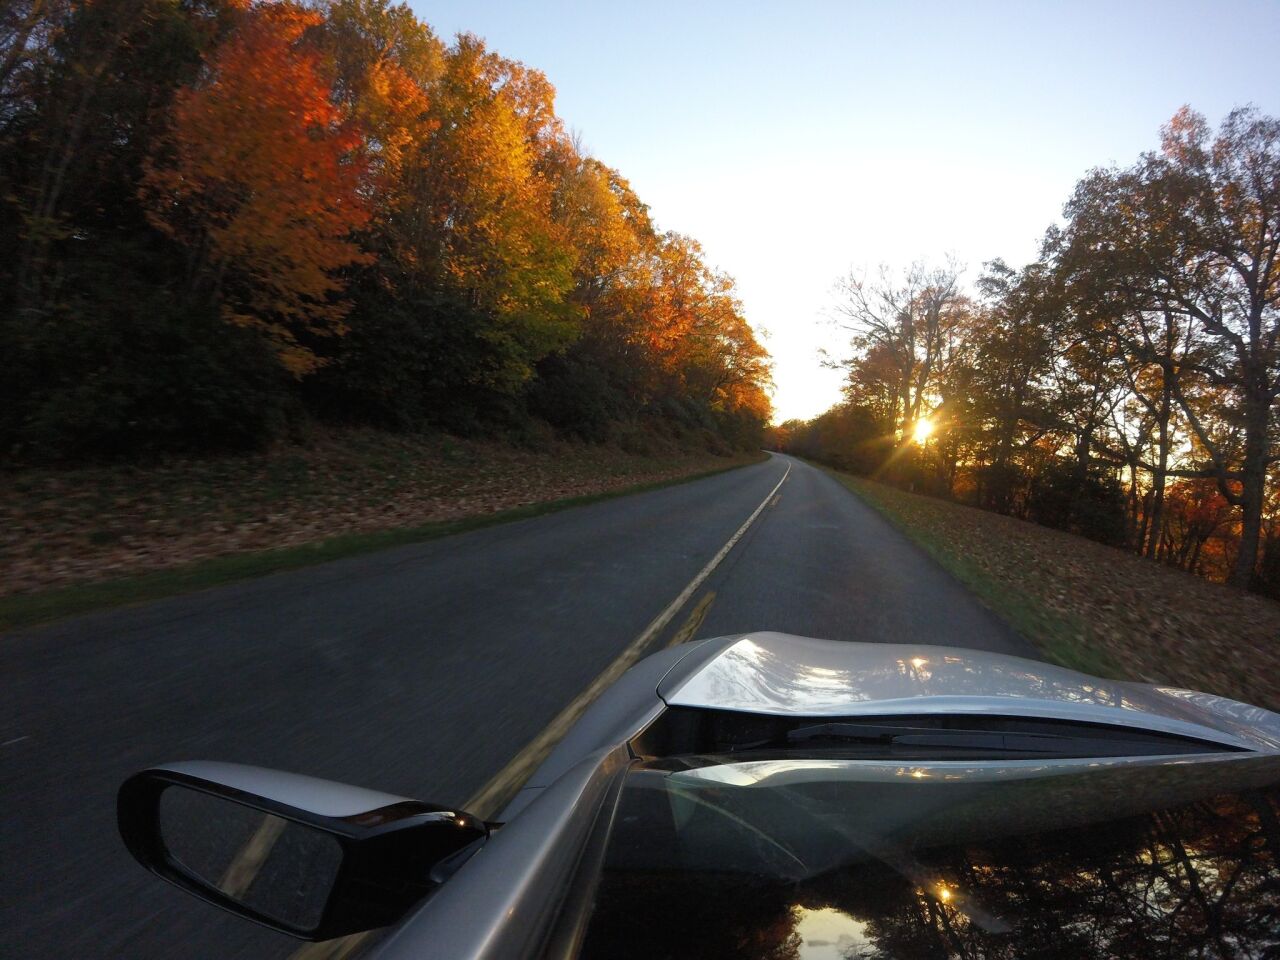 A car-mounted GoPro camera catches late light Oct. 21 on a stand of trees near Cranberry, N.C.